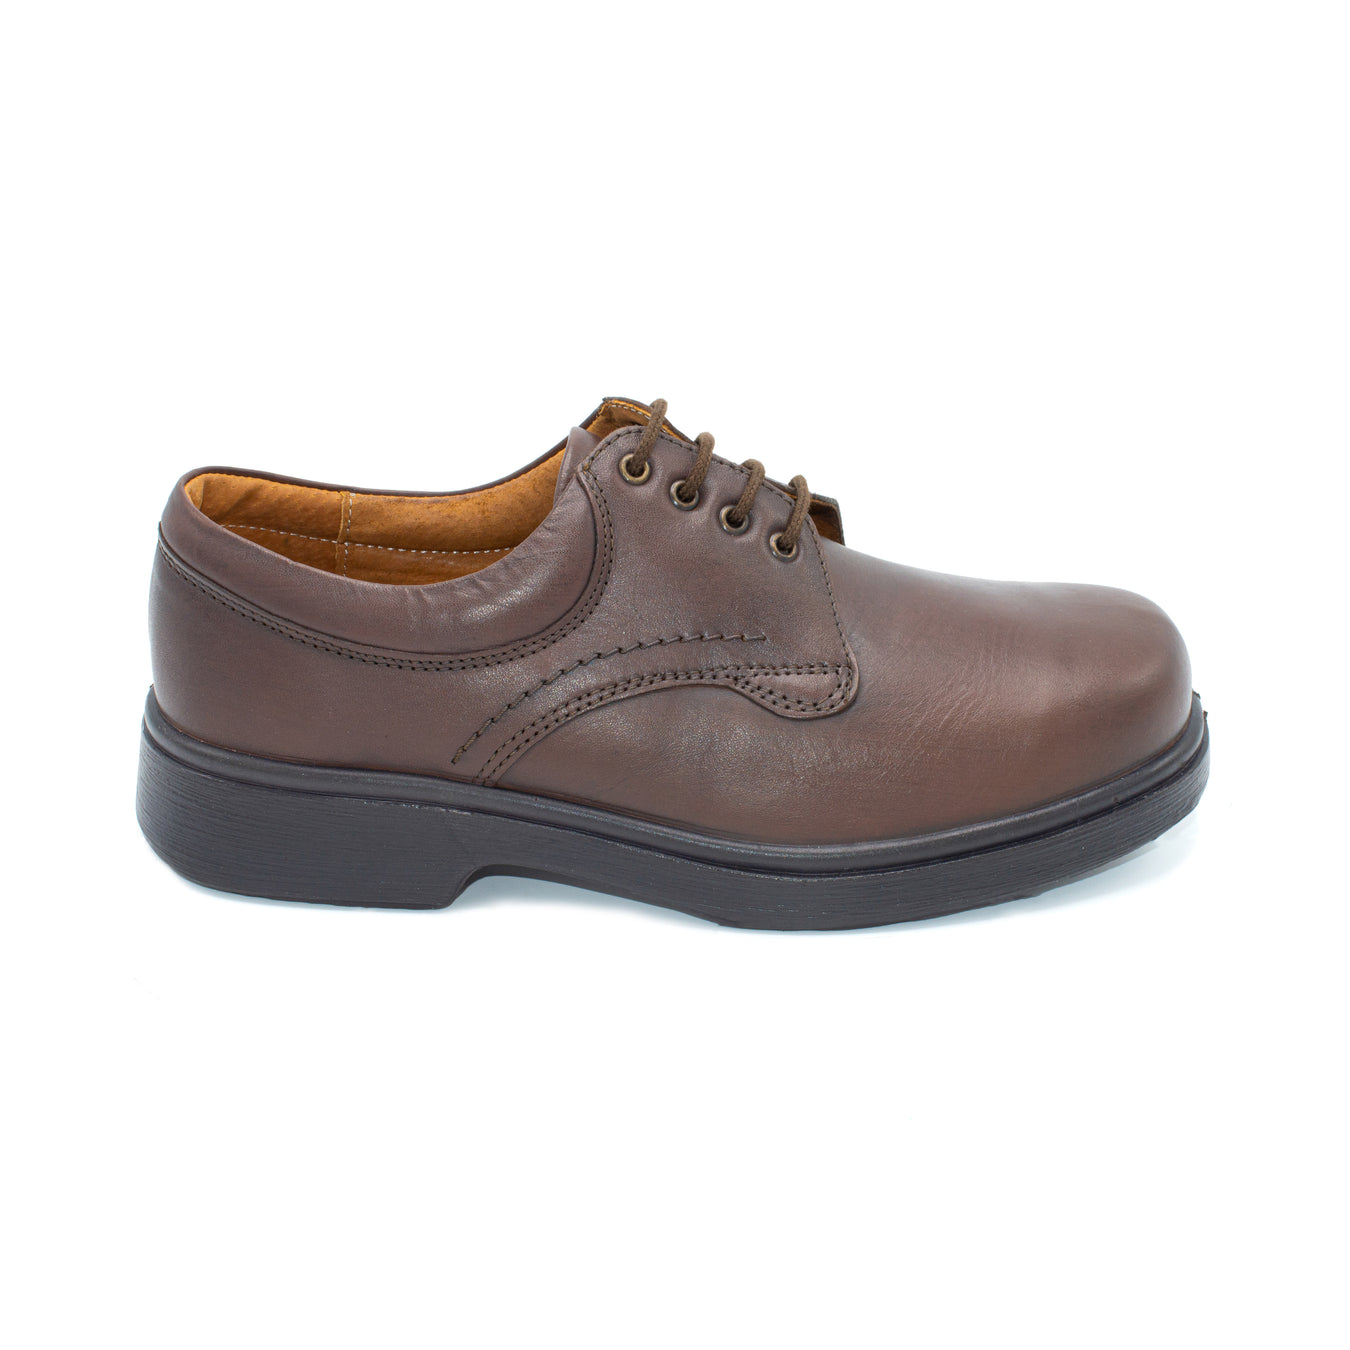 Mens wide fit shoes for diabetics. Seam free and cushioning.